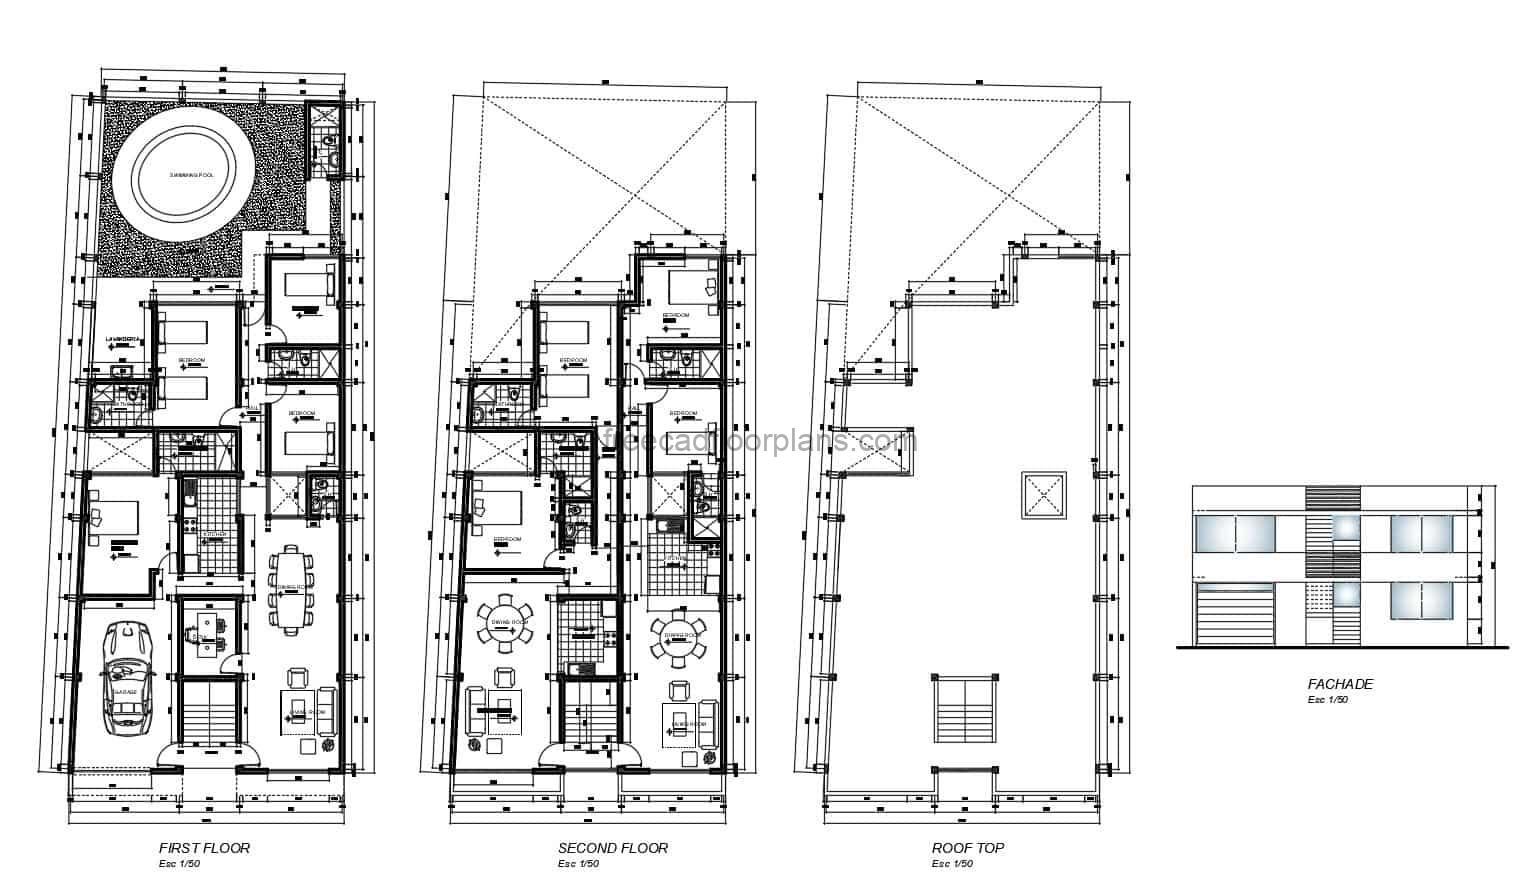 Floor plans with dimensions and details of two-story multi-family house and several 2 and 4 bedroom houses with large yard and pool, floor plan with facade and interior autocad blocks for free download.